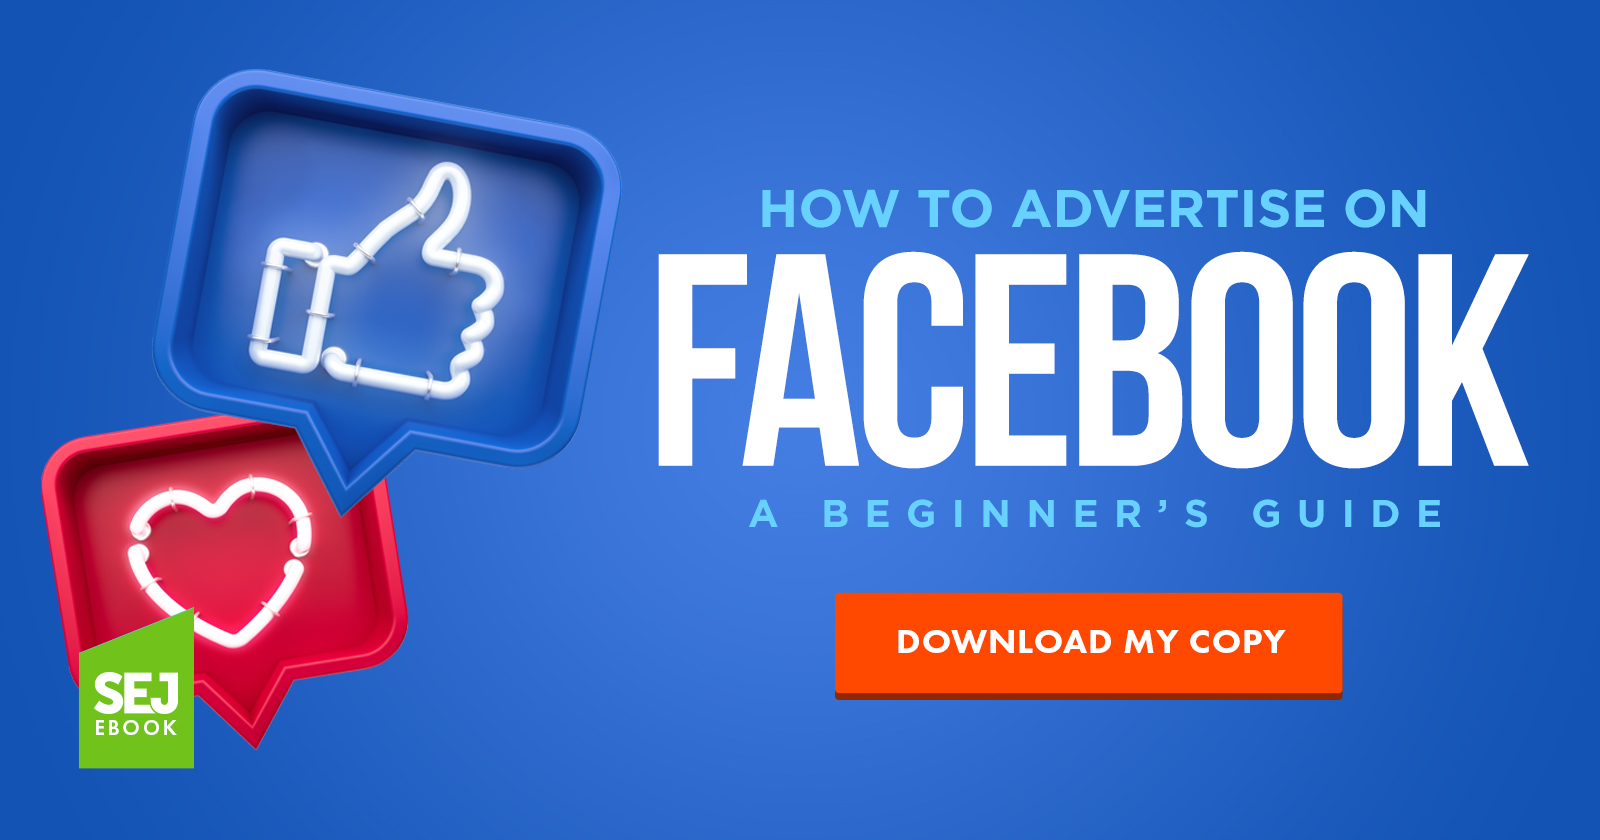 How To Advertise On Facebook A Beginners Guide